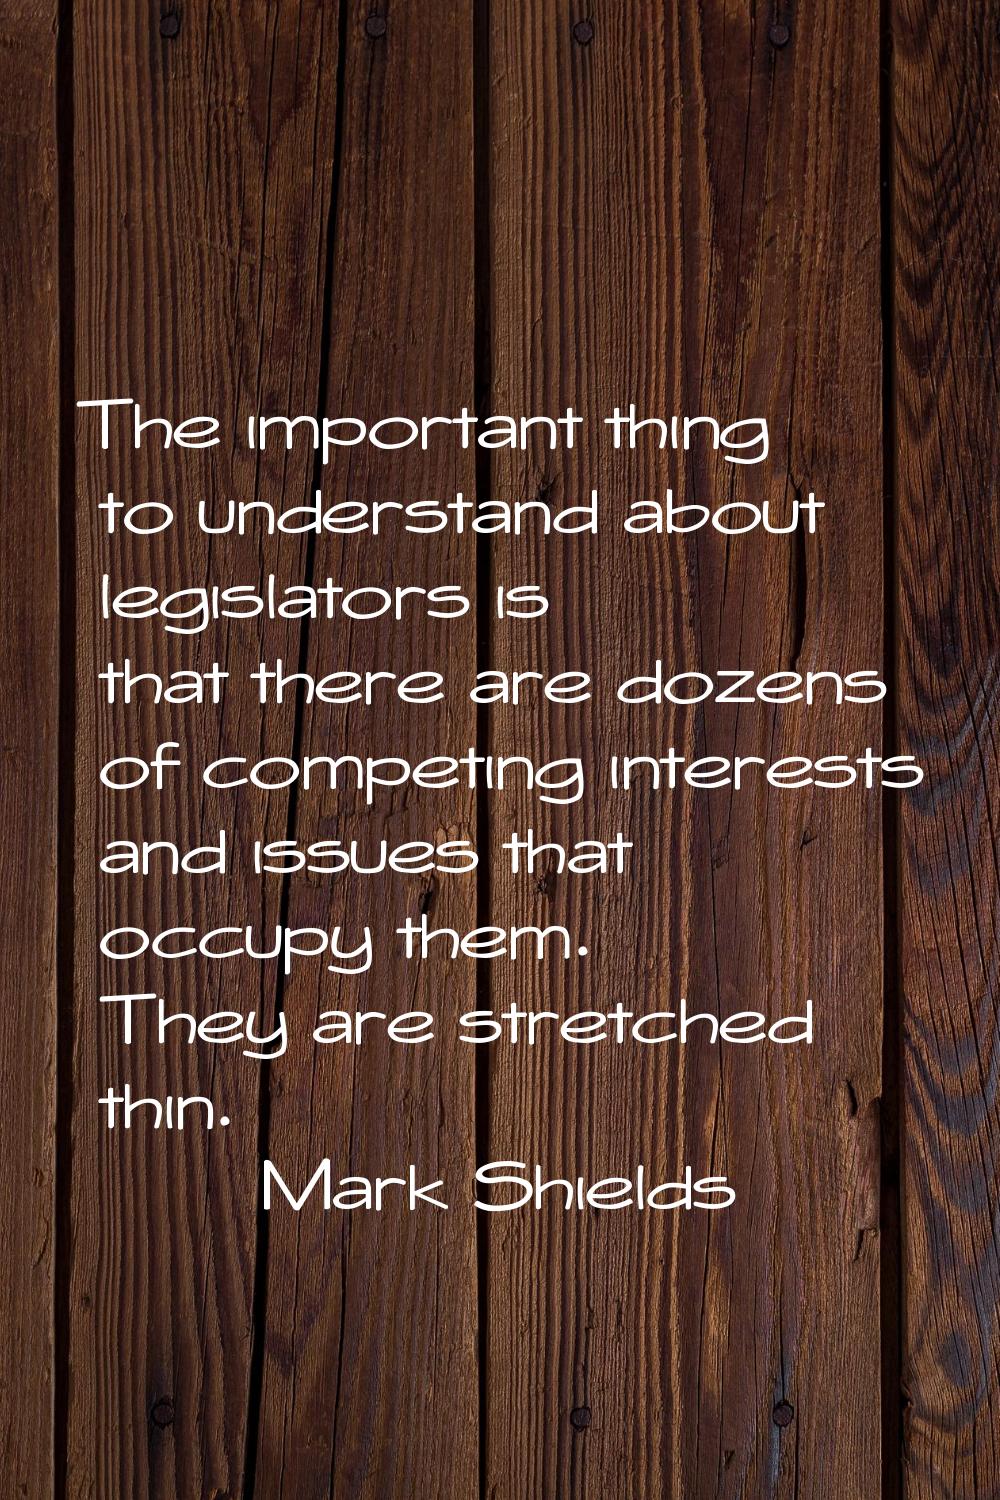 The important thing to understand about legislators is that there are dozens of competing interests